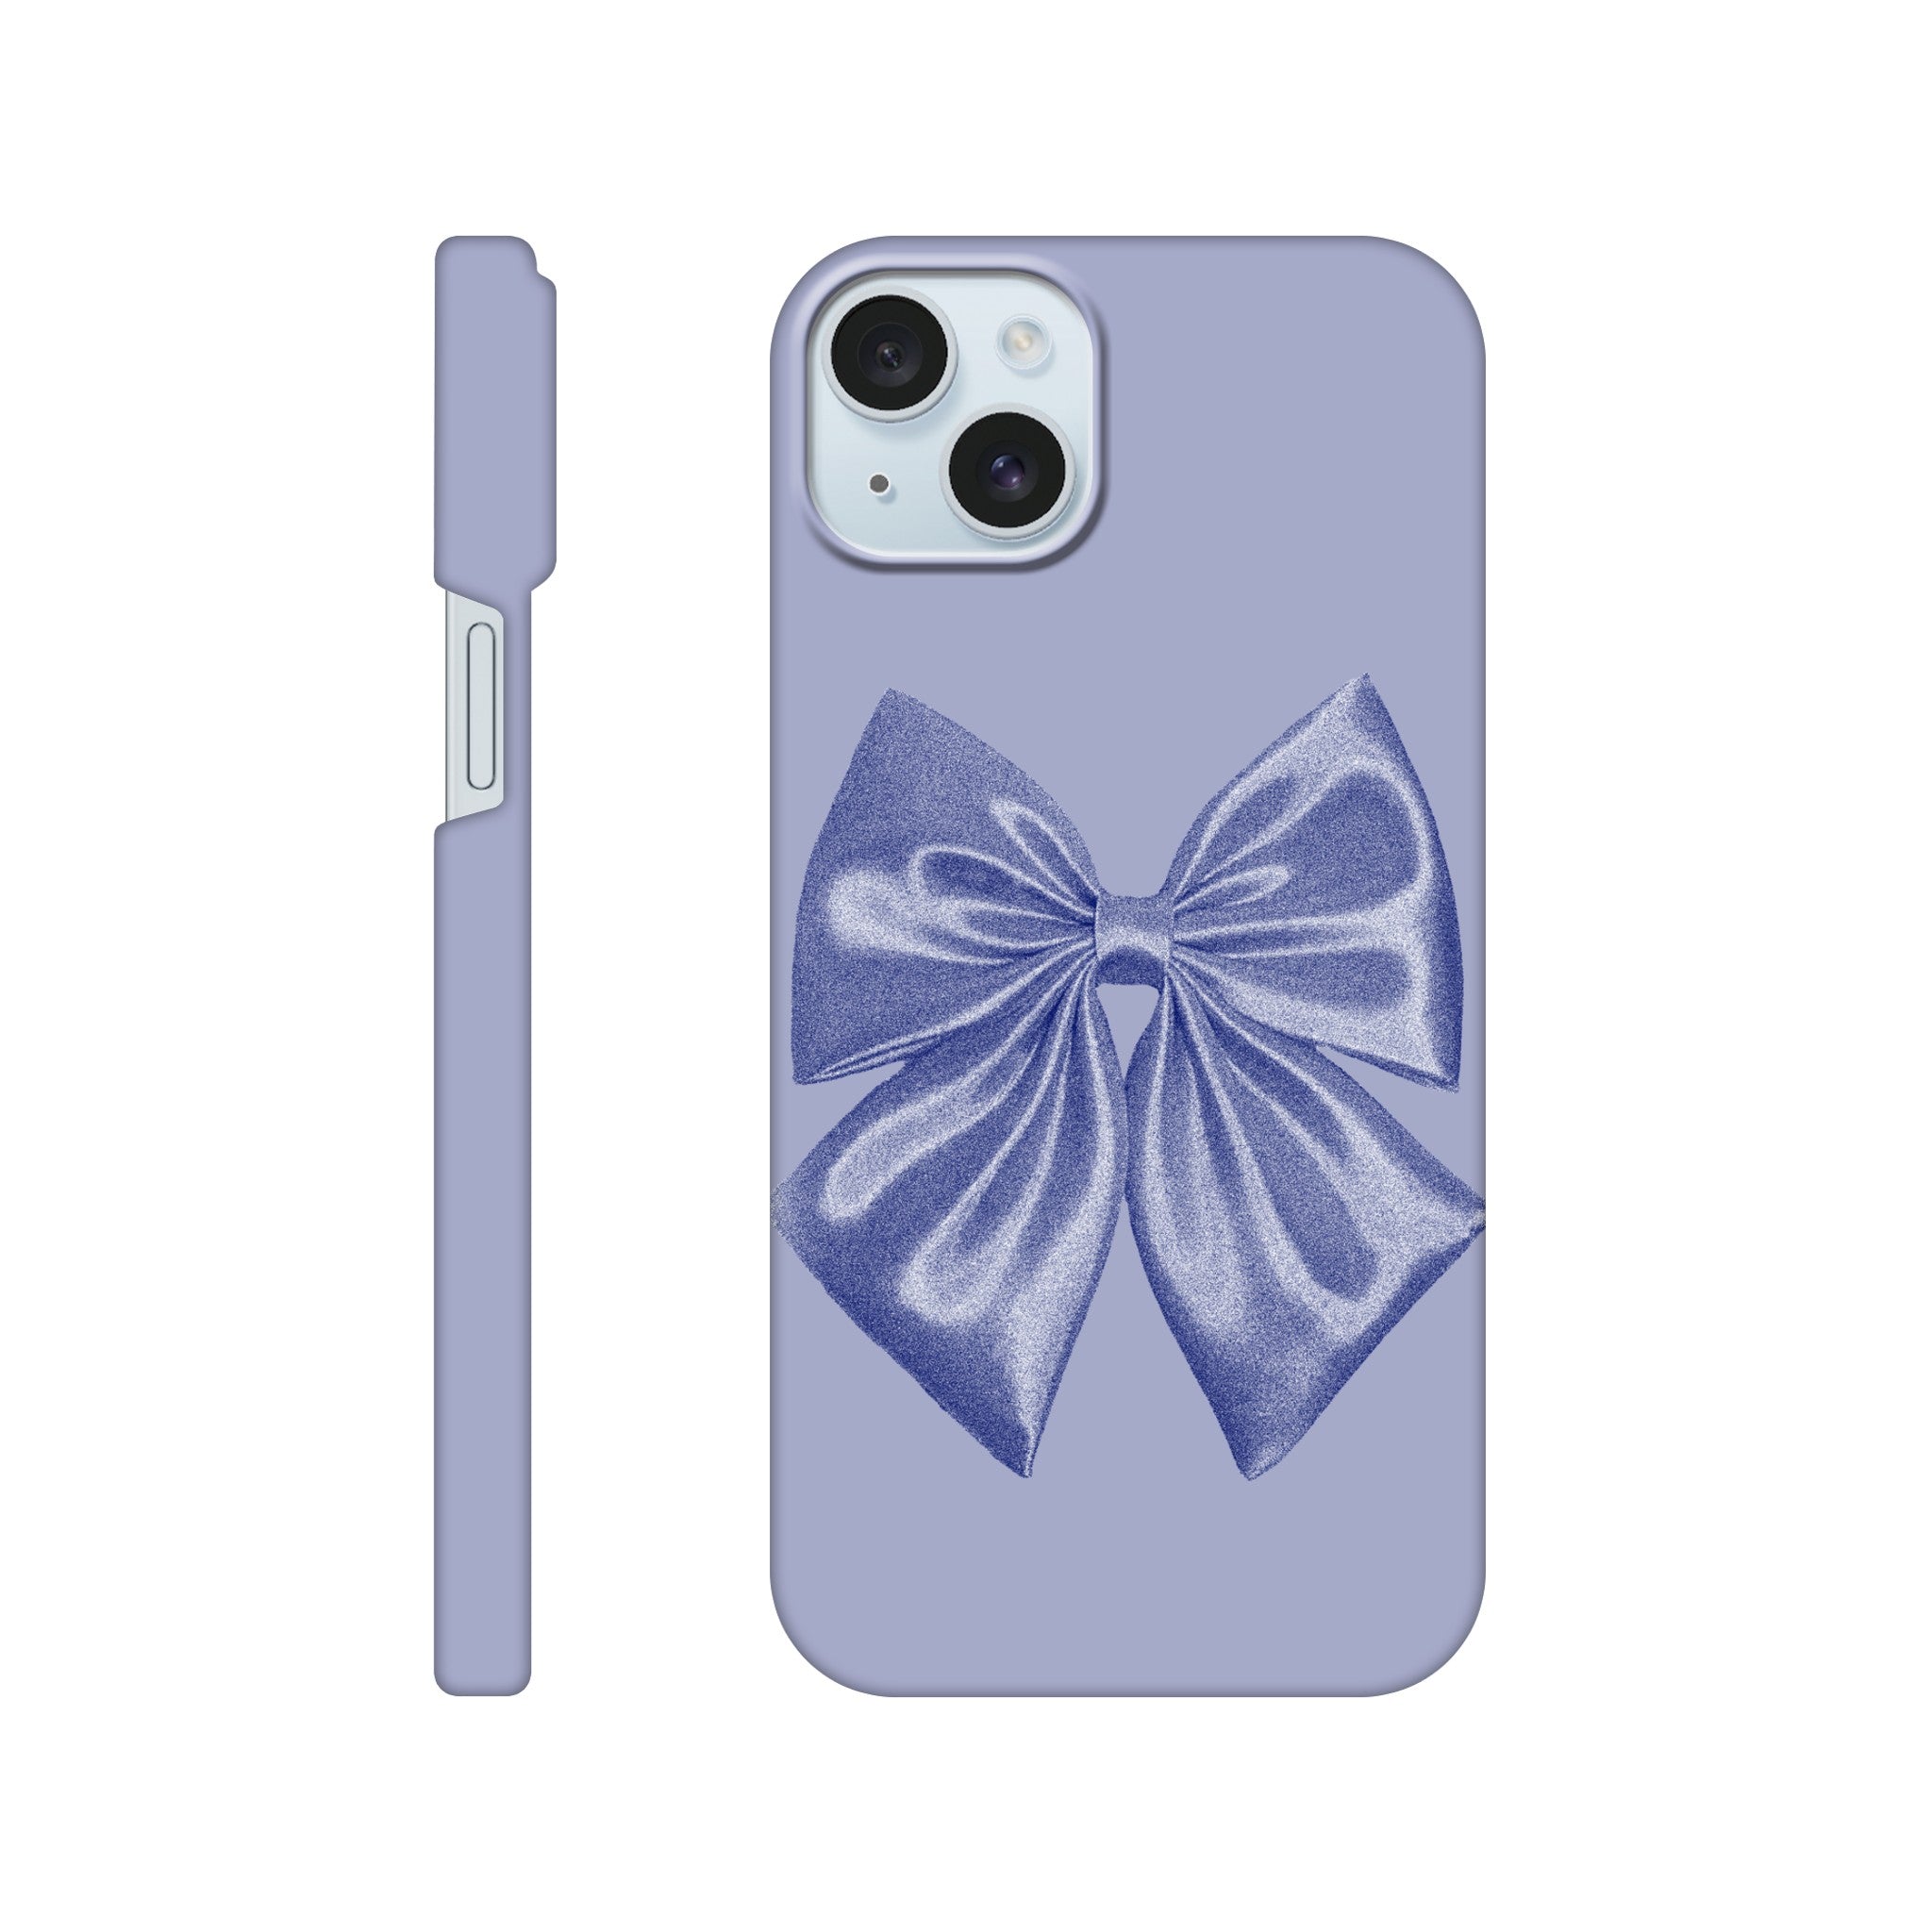 'Wrapped Up' phone case - In Print We Trust